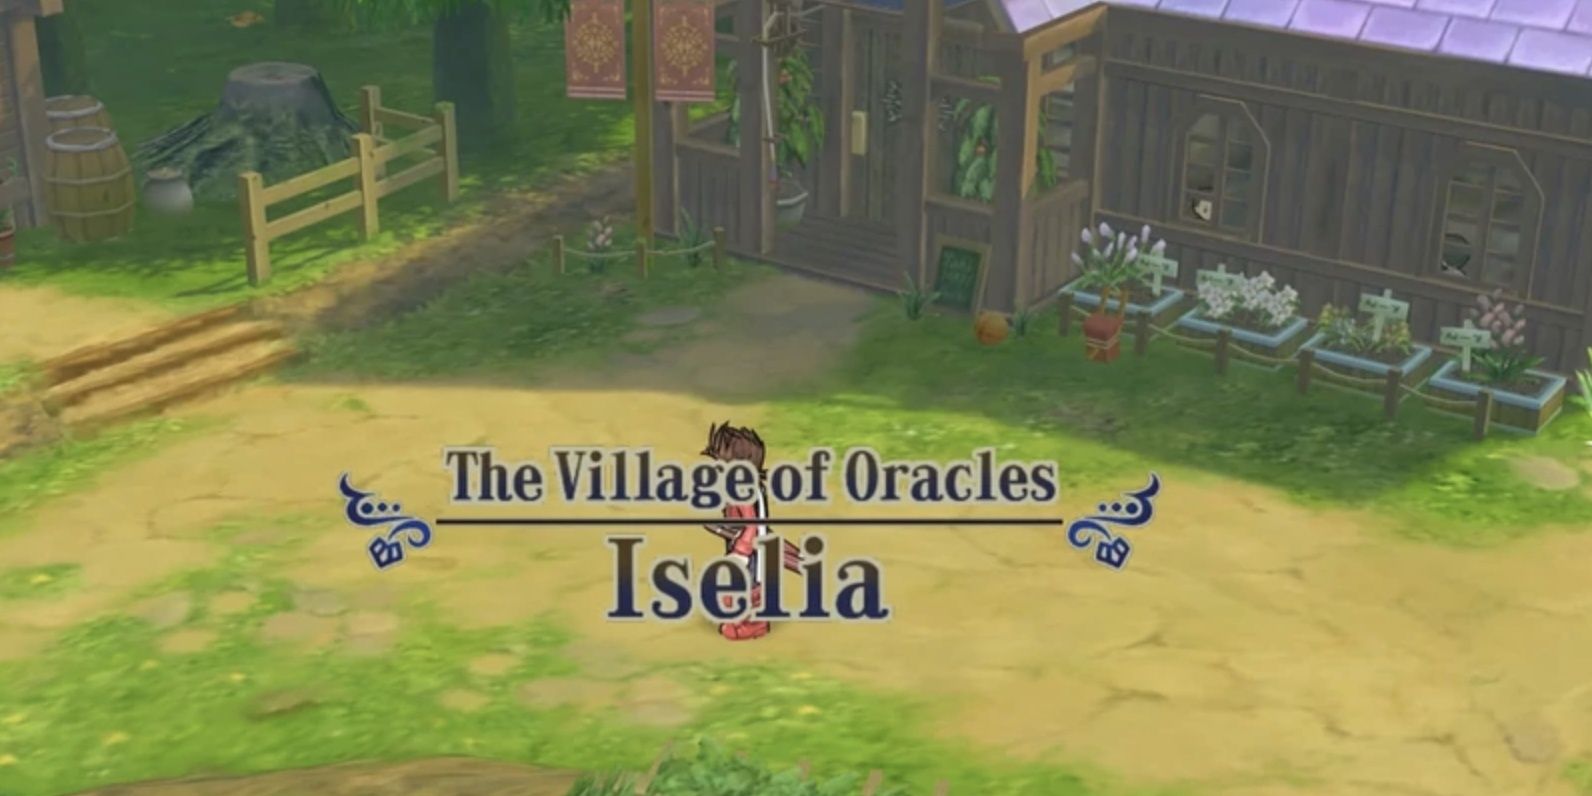 iselia village of oracles from tales of symphonia